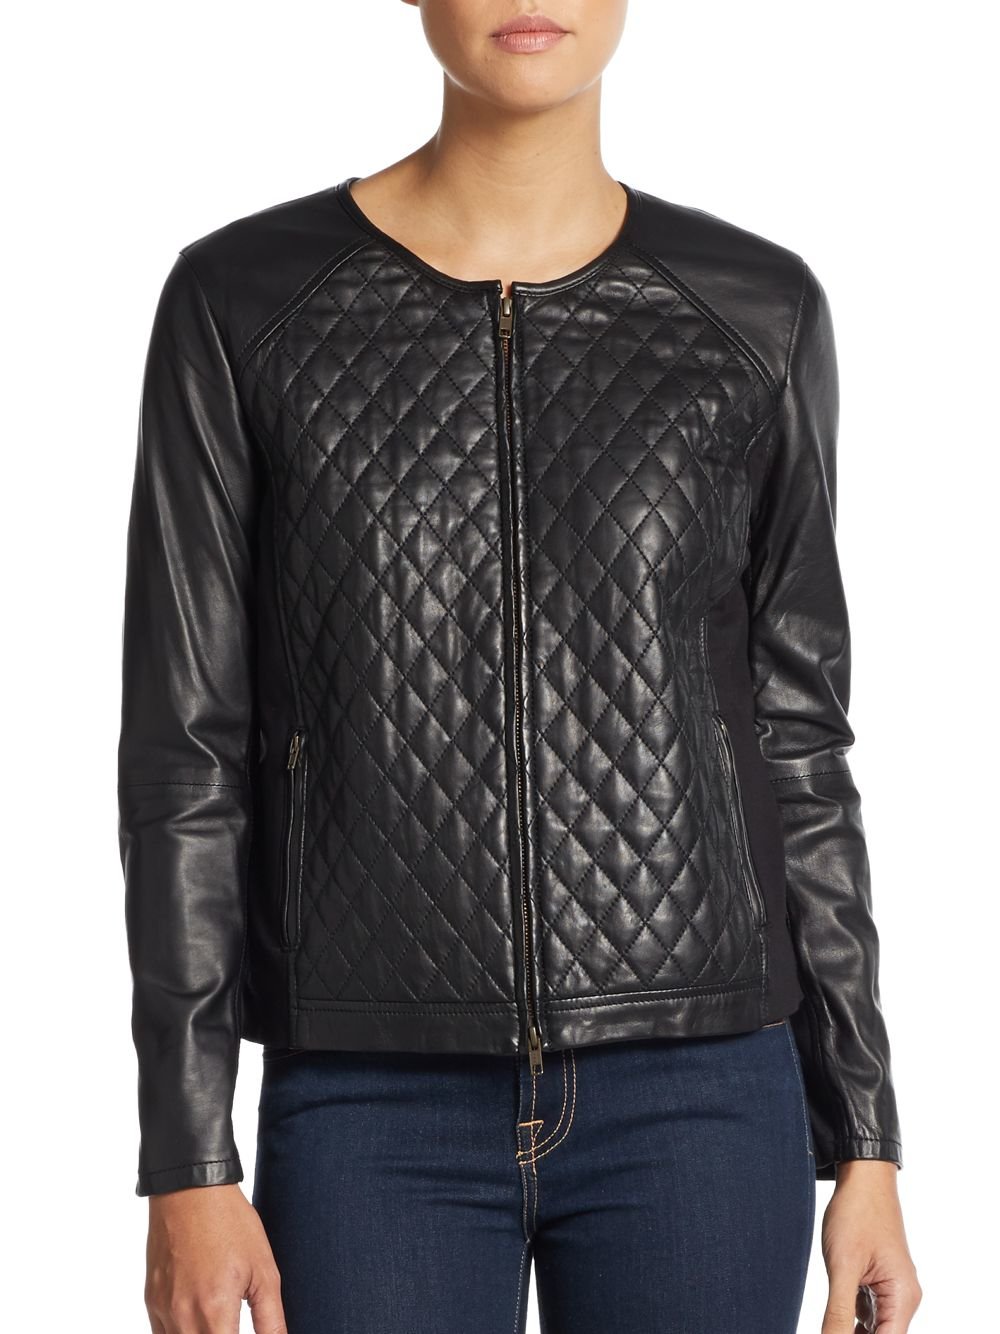 Lyst - Eileen Fisher Leather Quilted Jacket in Black